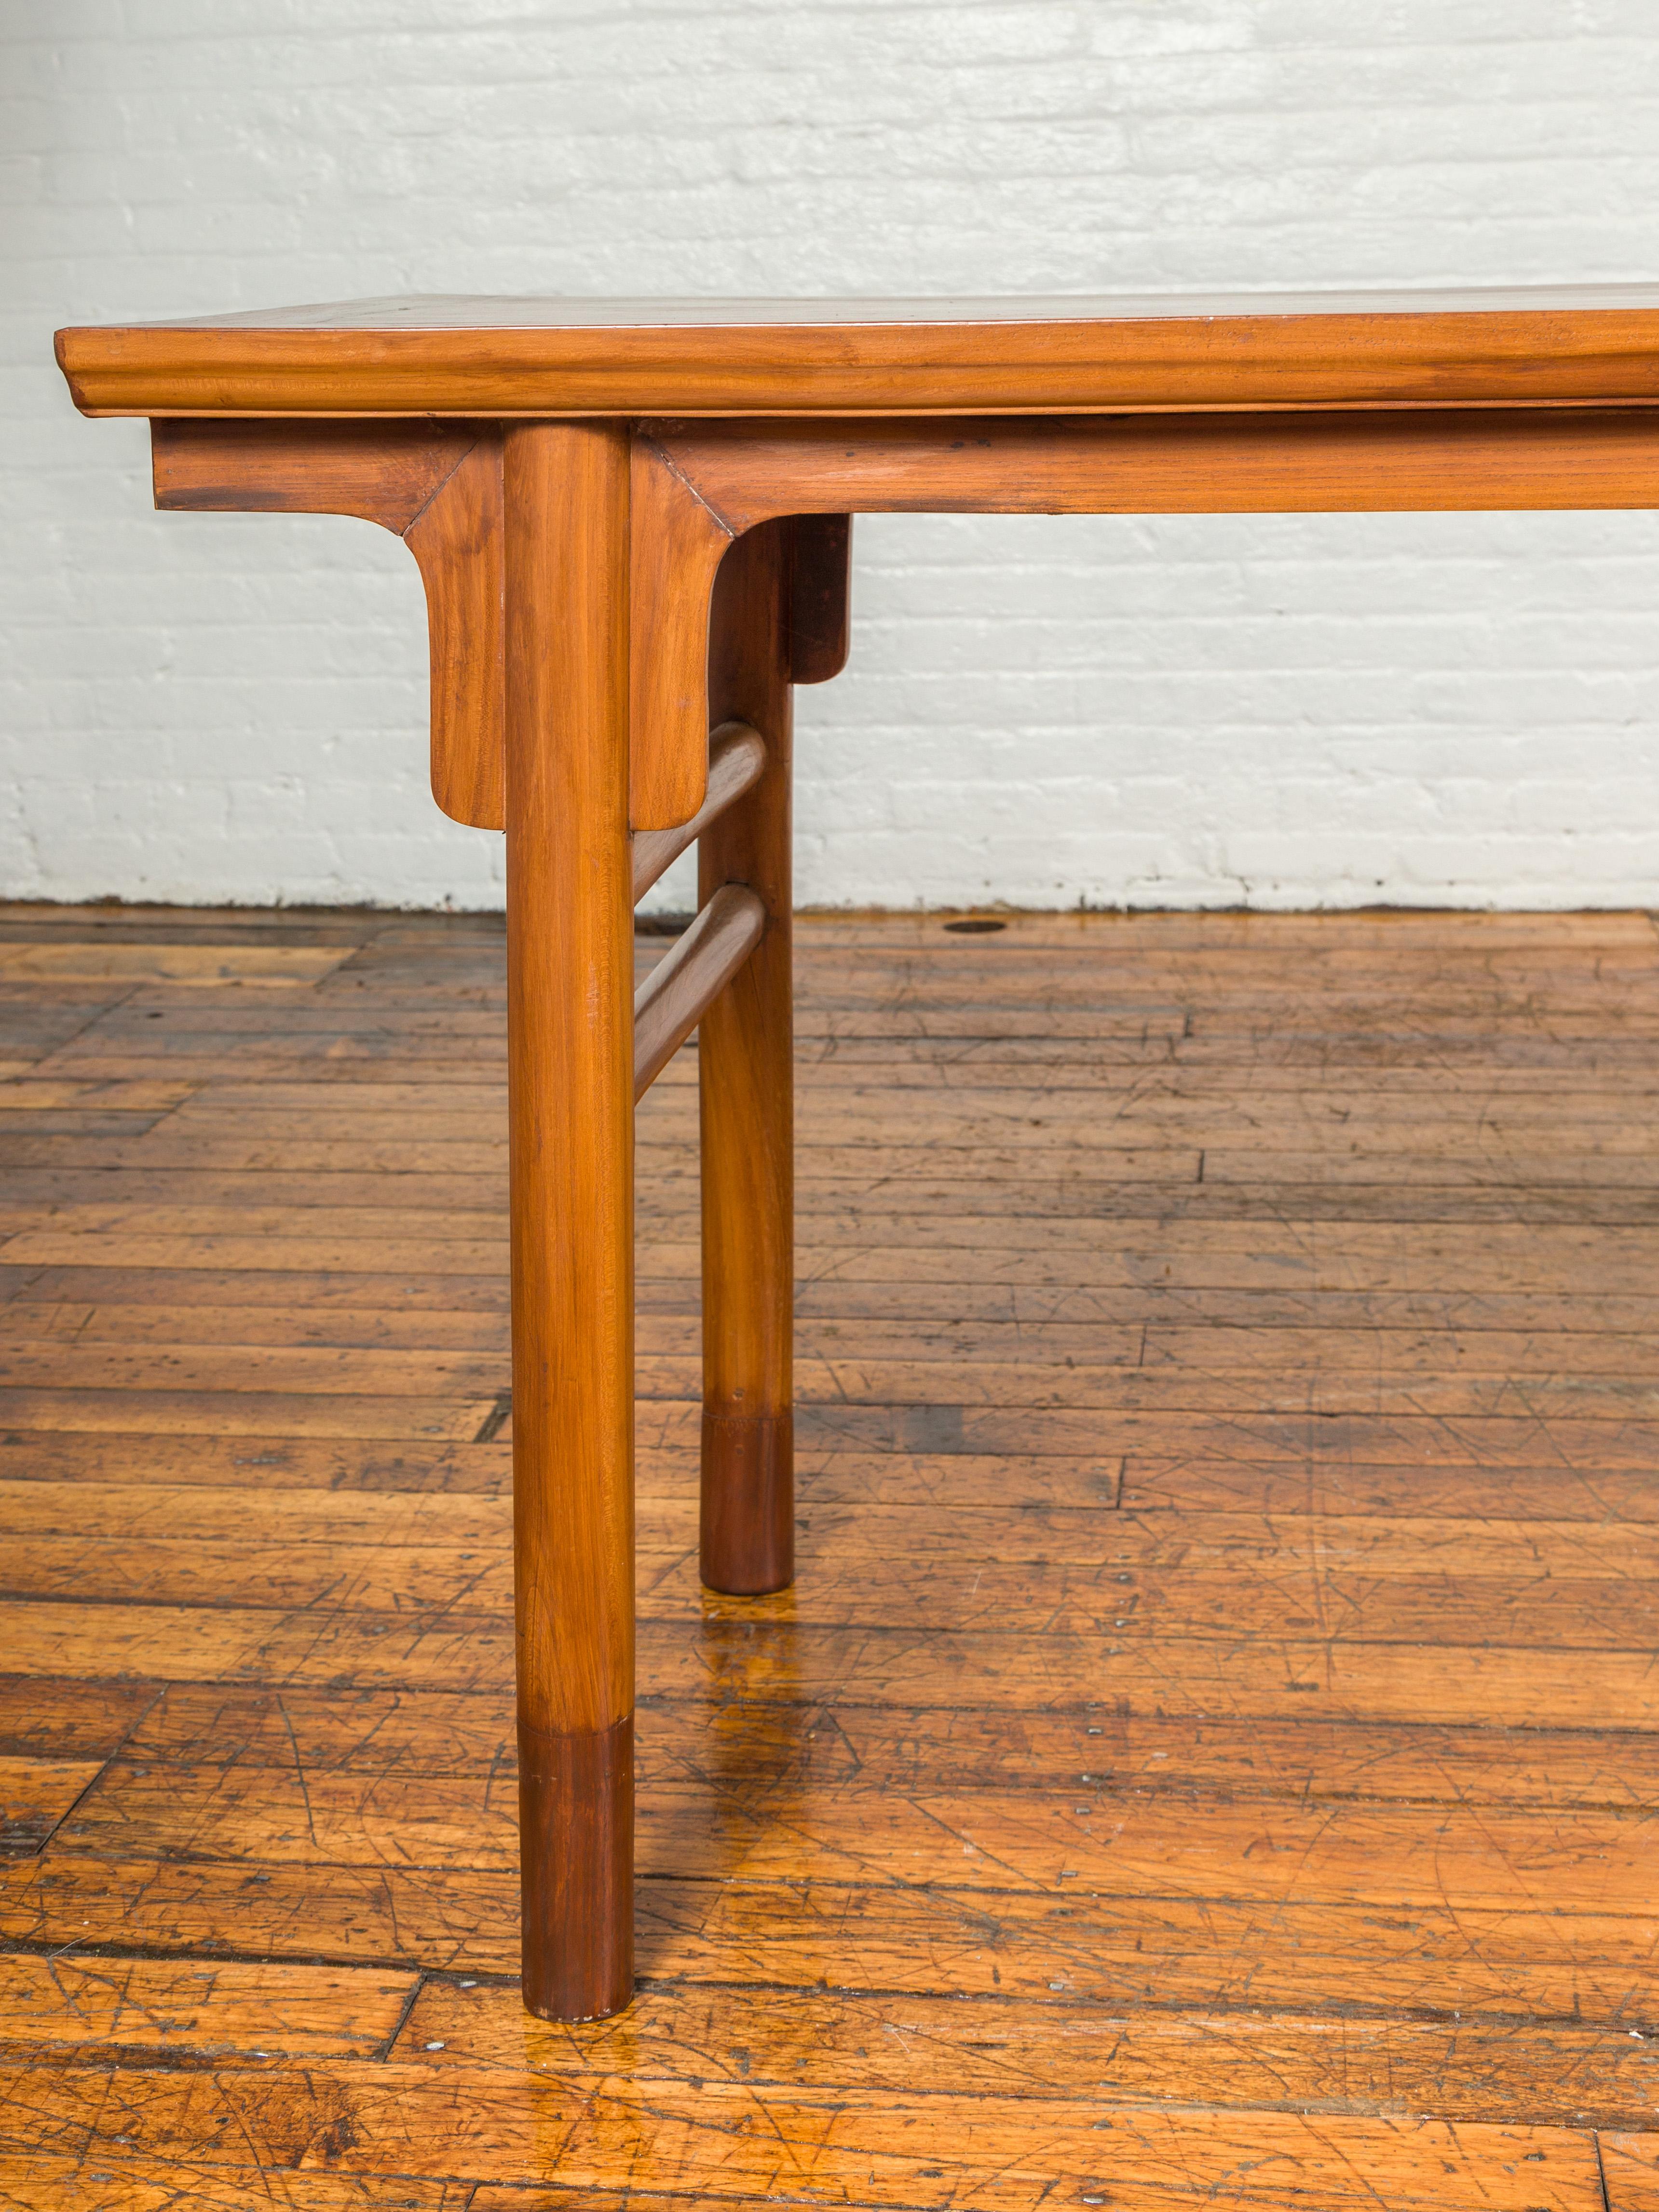 19th Century Chinese Ming Dynasty Style Elmwood Altar Console Table with Simple Design